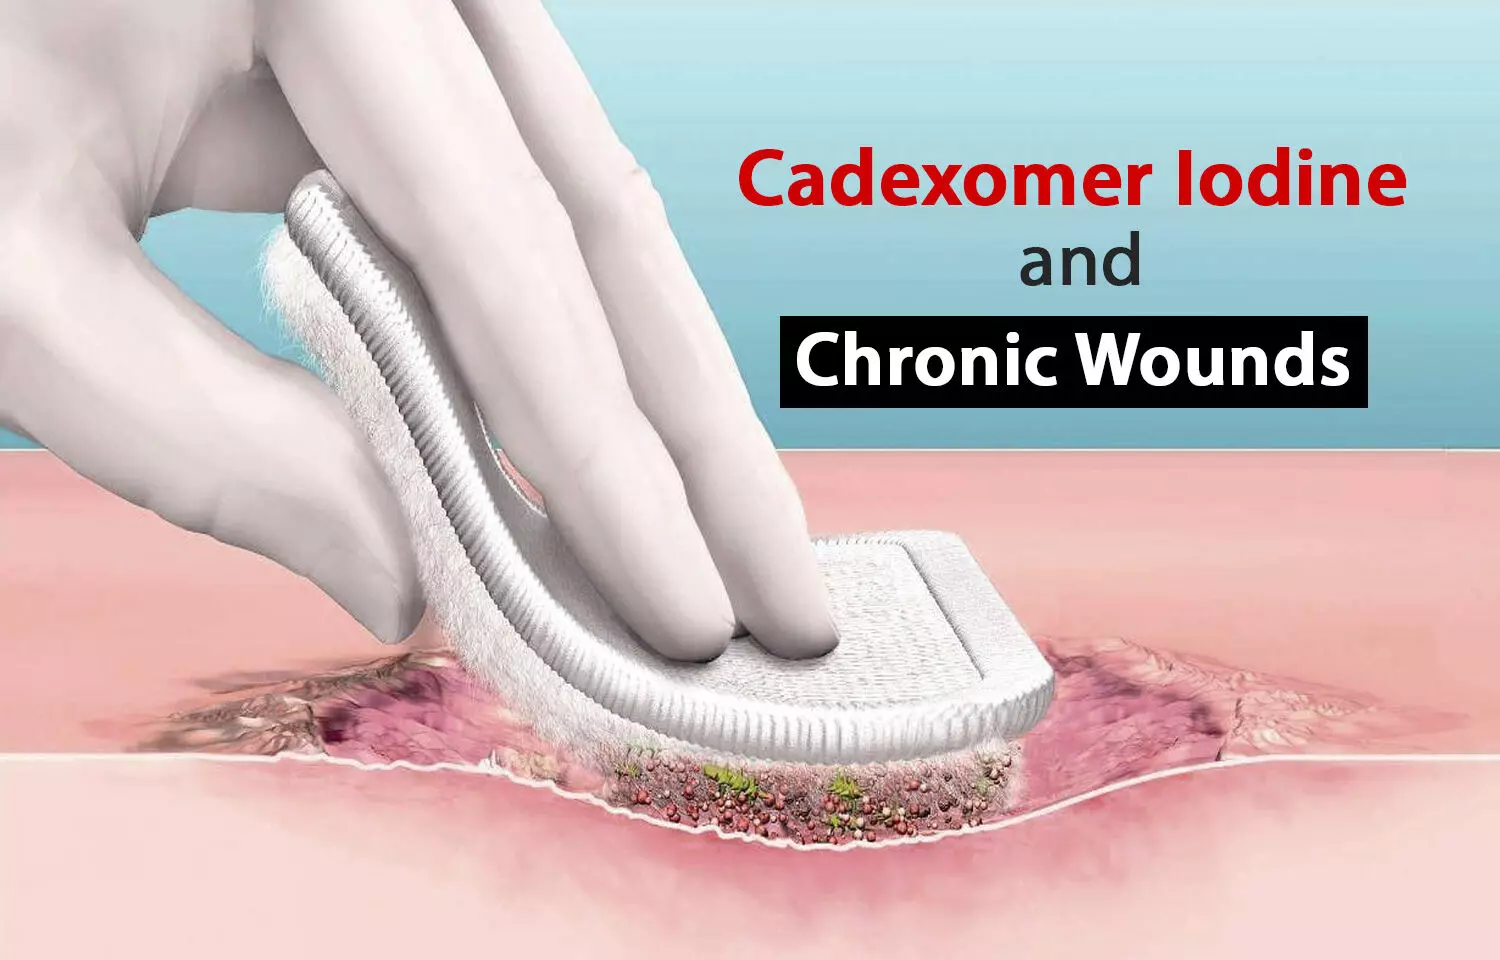 Efficacy of Cadexomer Iodine in managing chronic wounds: Reports from a meta-analysis.